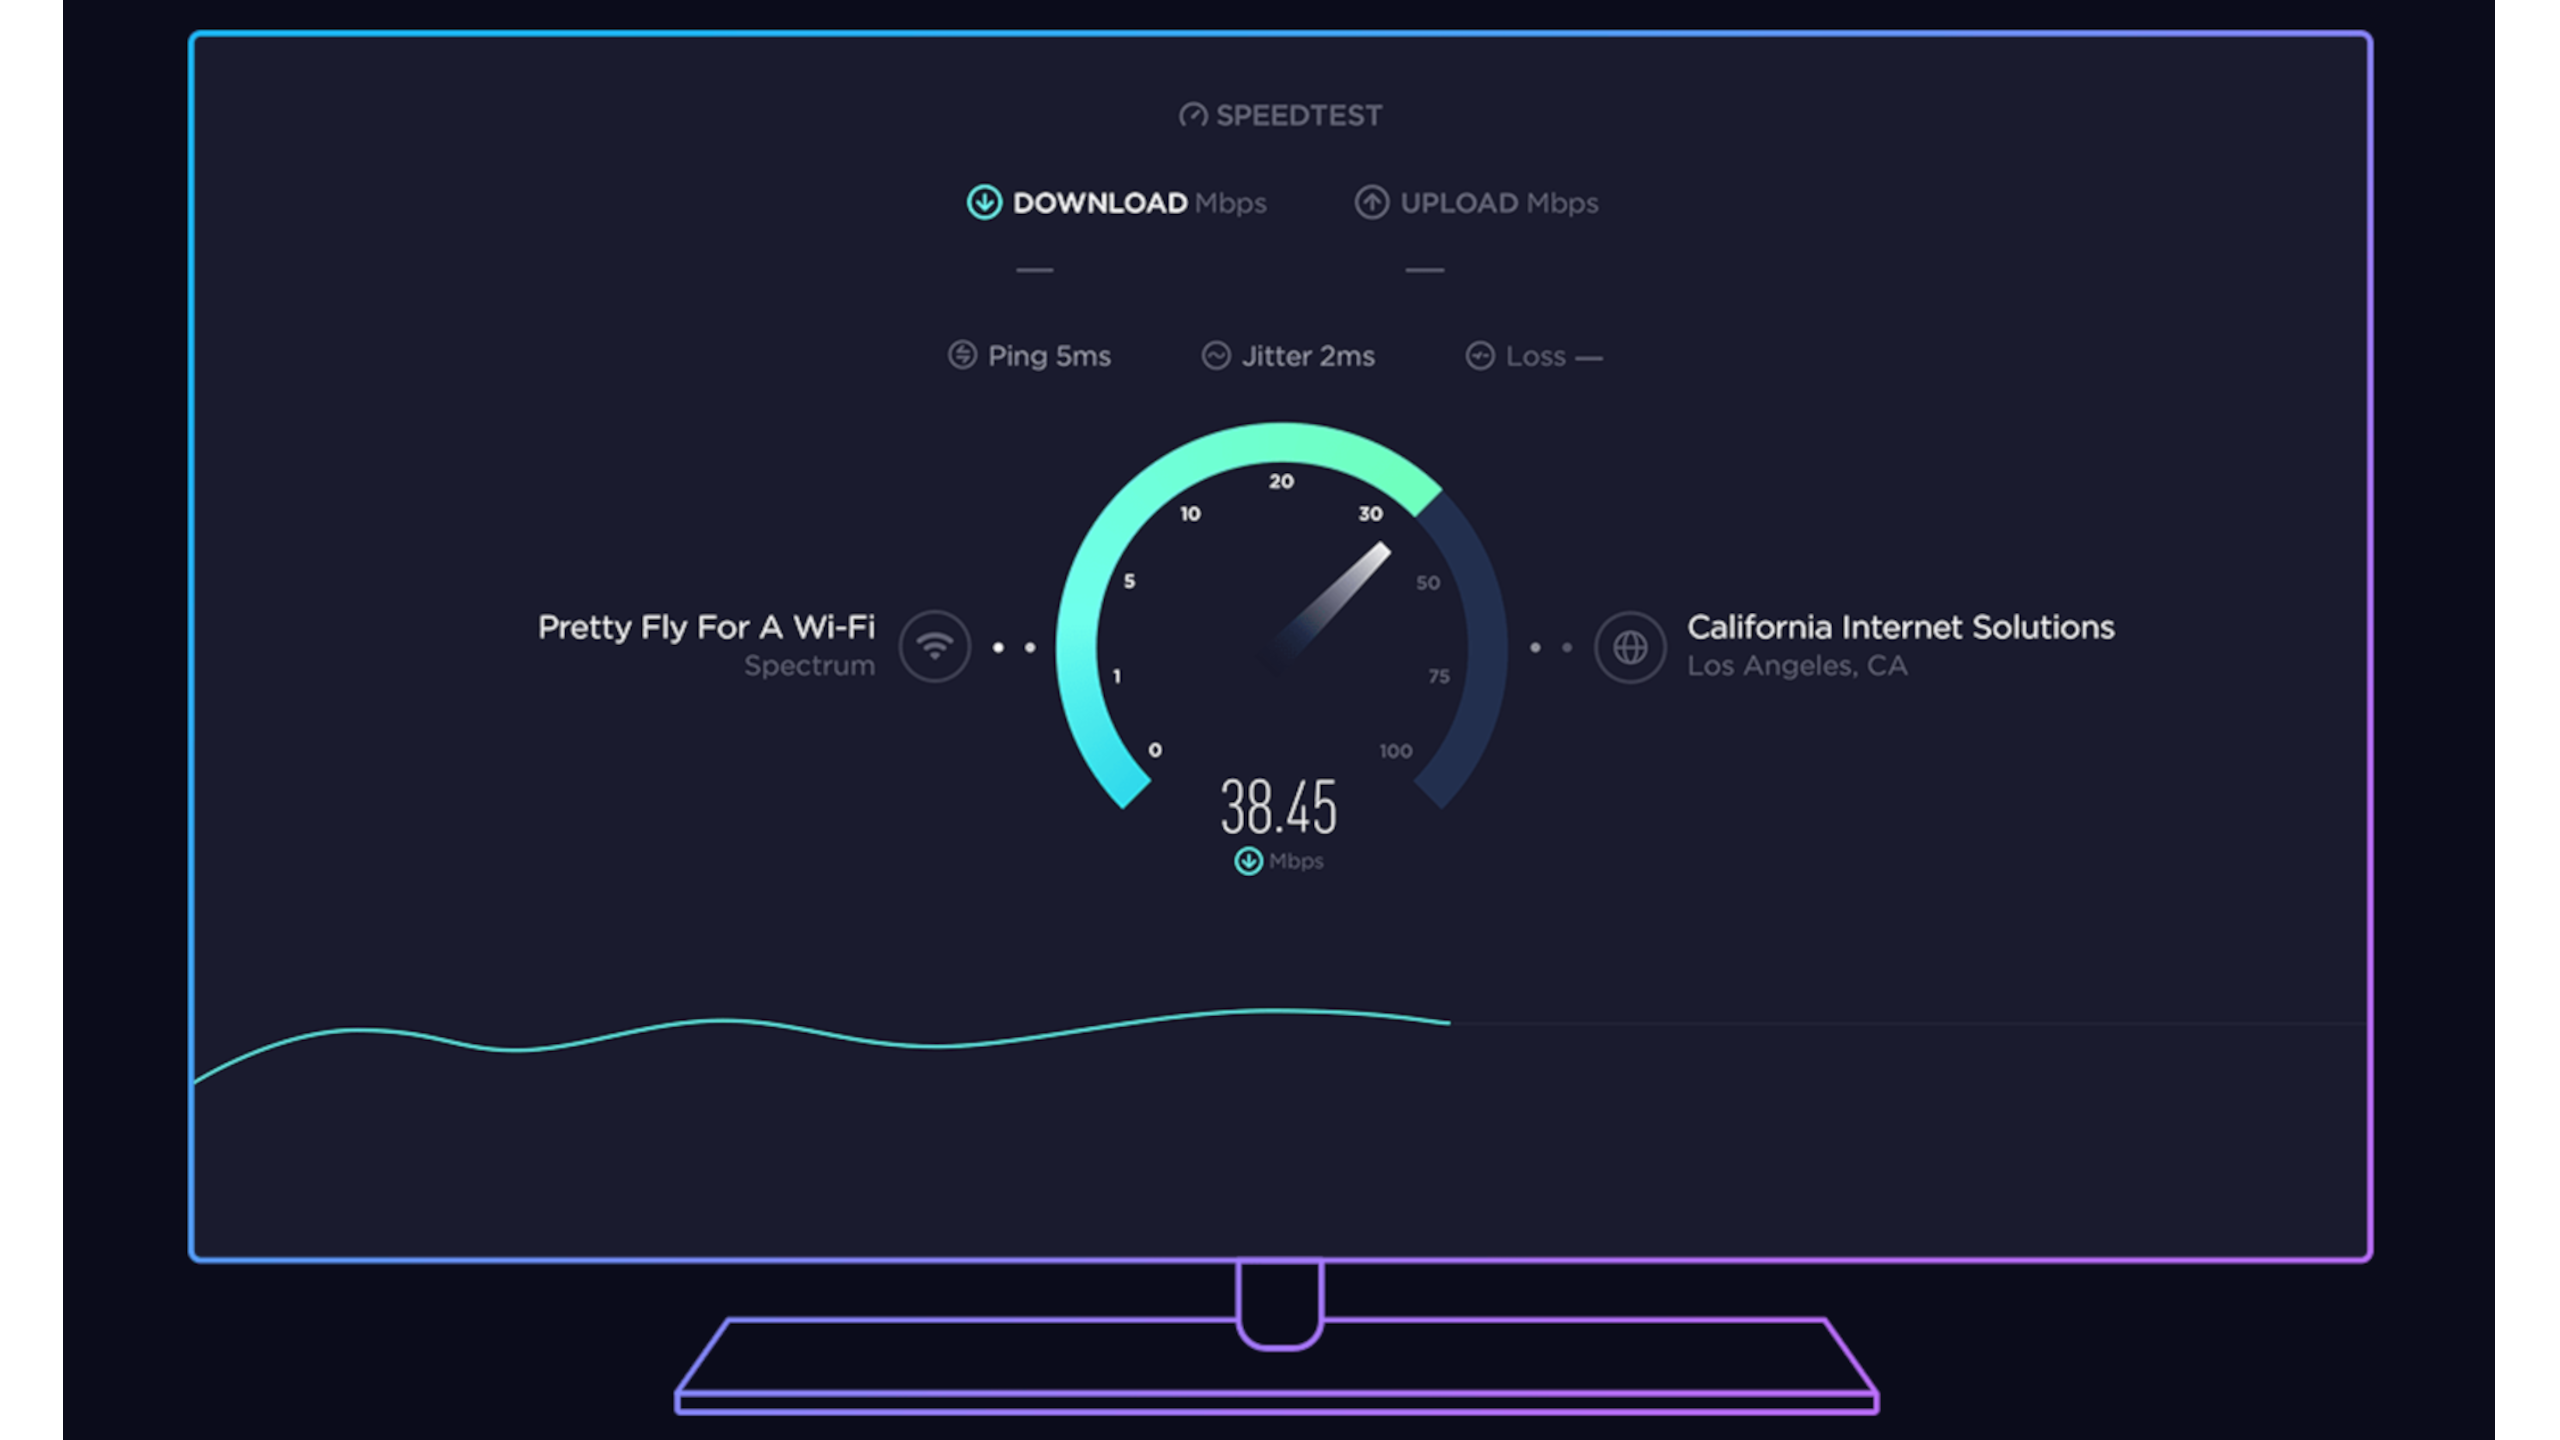 Graphic of Speedtest by Ookla running on a TV